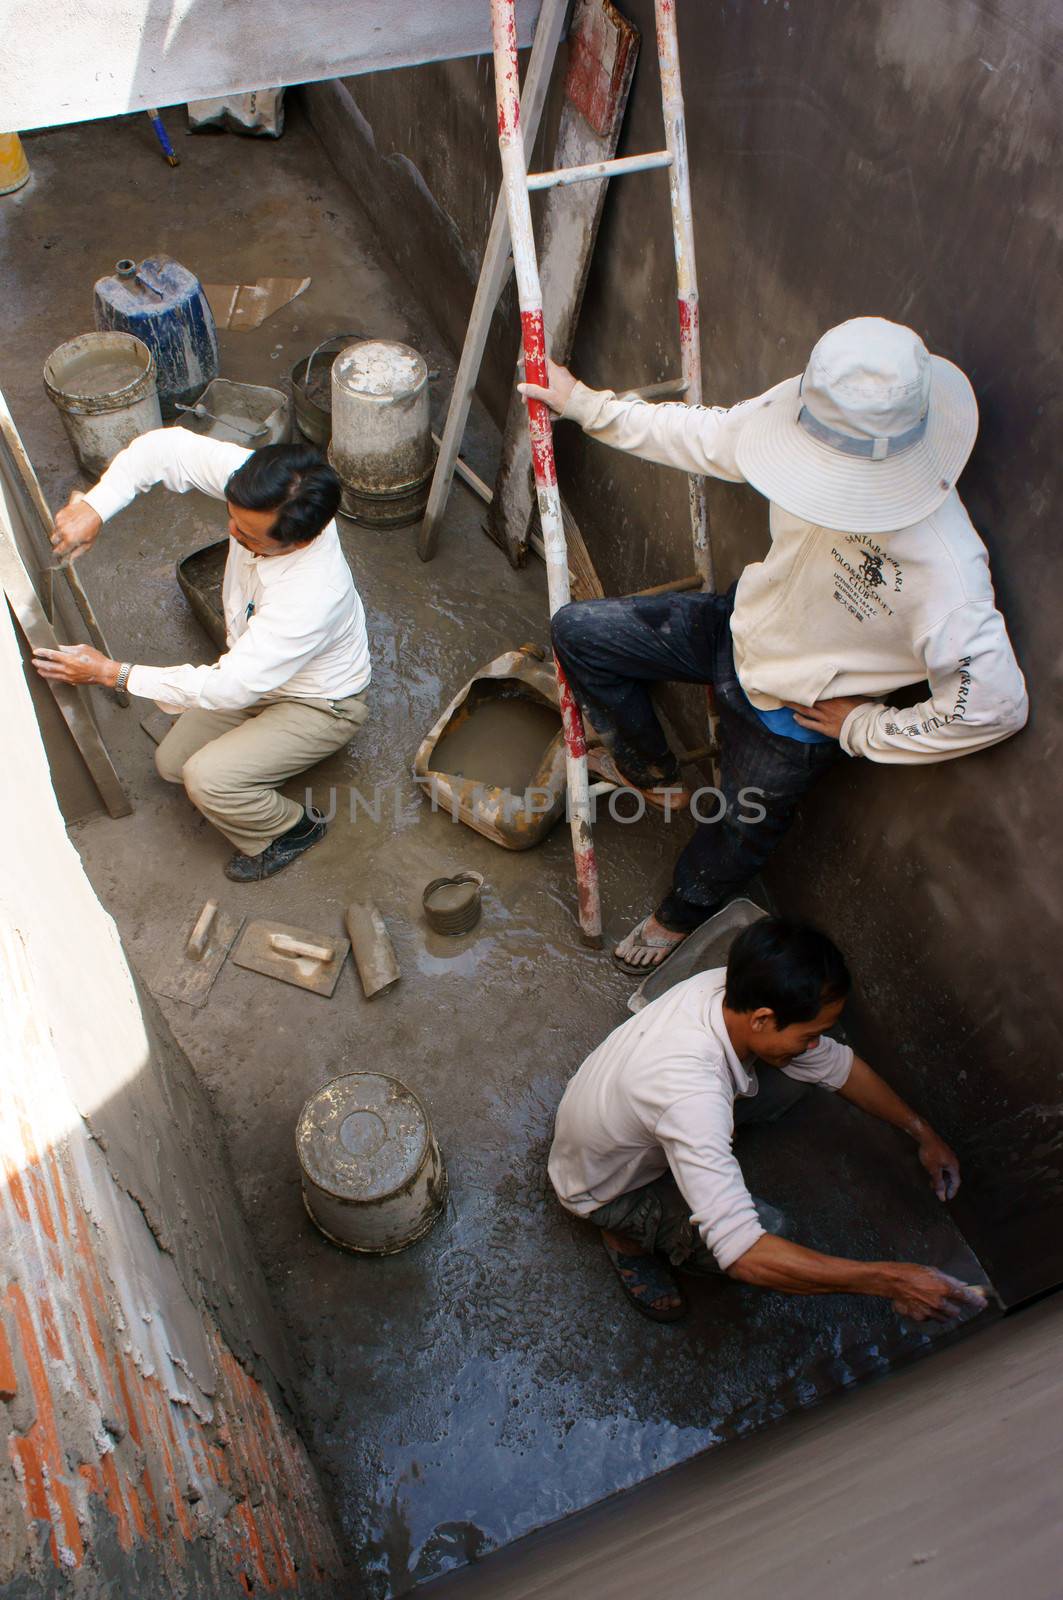 PHAN THIET, VIETNAM- JAN 21: Builder mortar at civil works, they working underground, with trowel in hand, mason cover mortar layer on brick wall to make solid, Viet Nam, Jan 21, 2014 